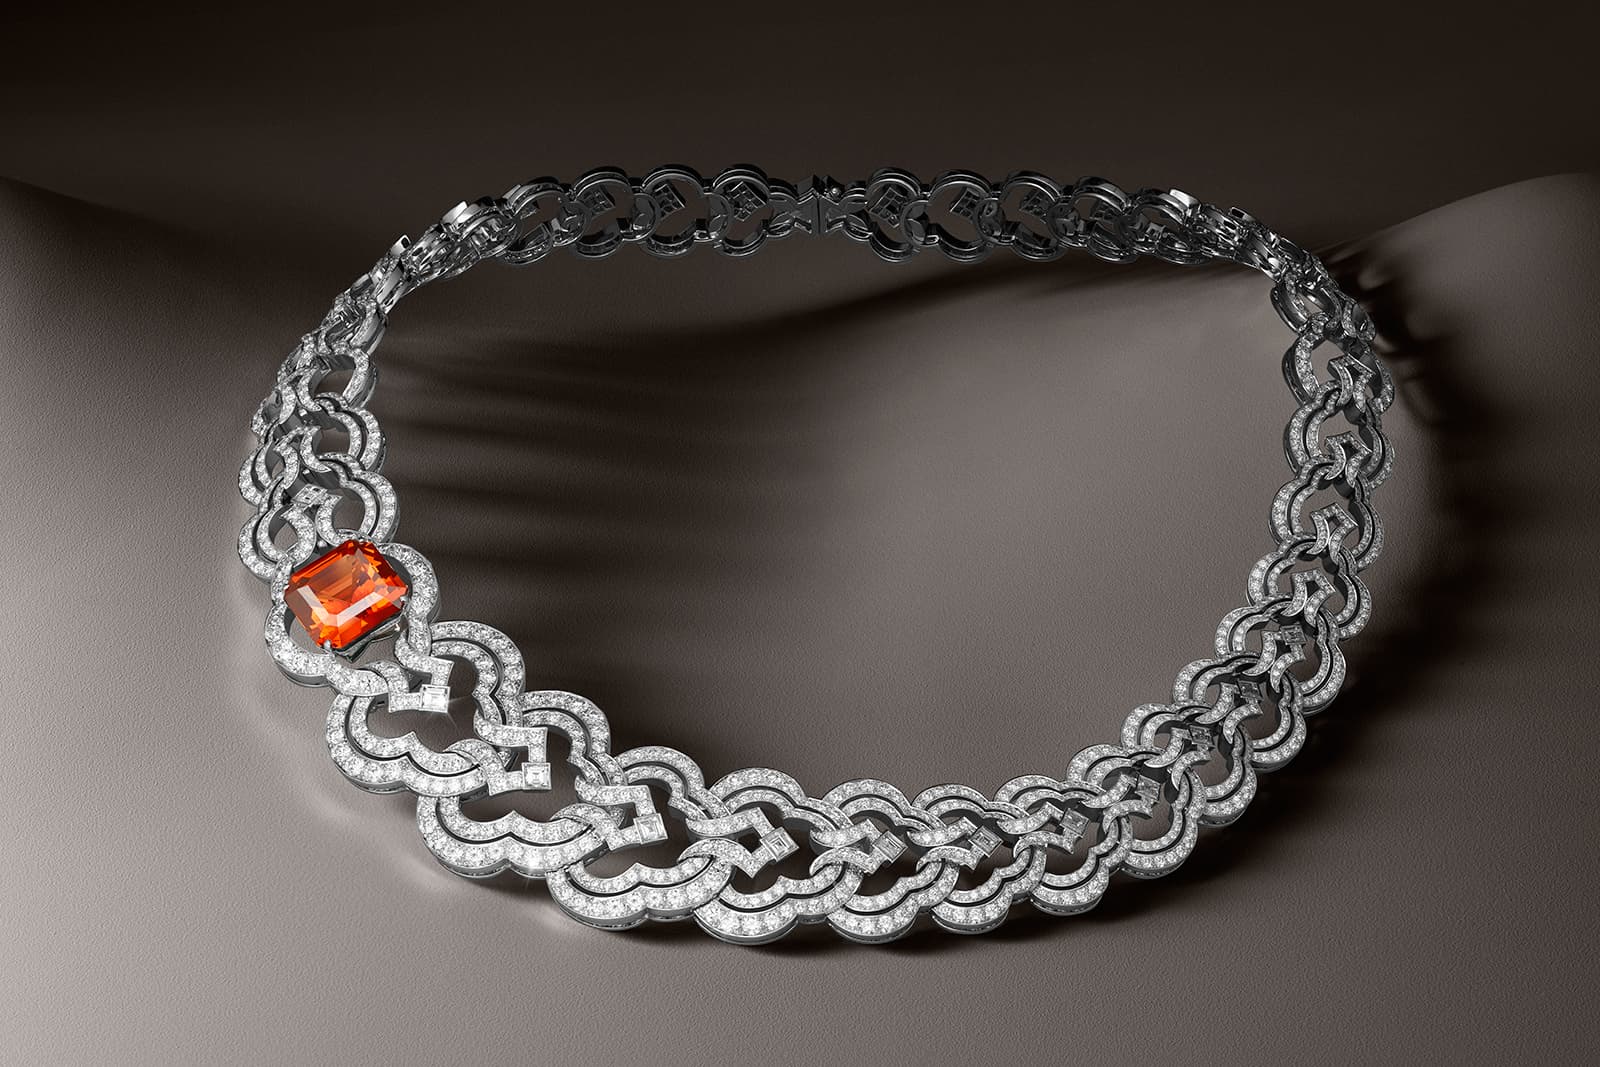 Louis Vuitton Conquêtes collection necklace with 16.82ct mandarin garnet and diamonds in white gold